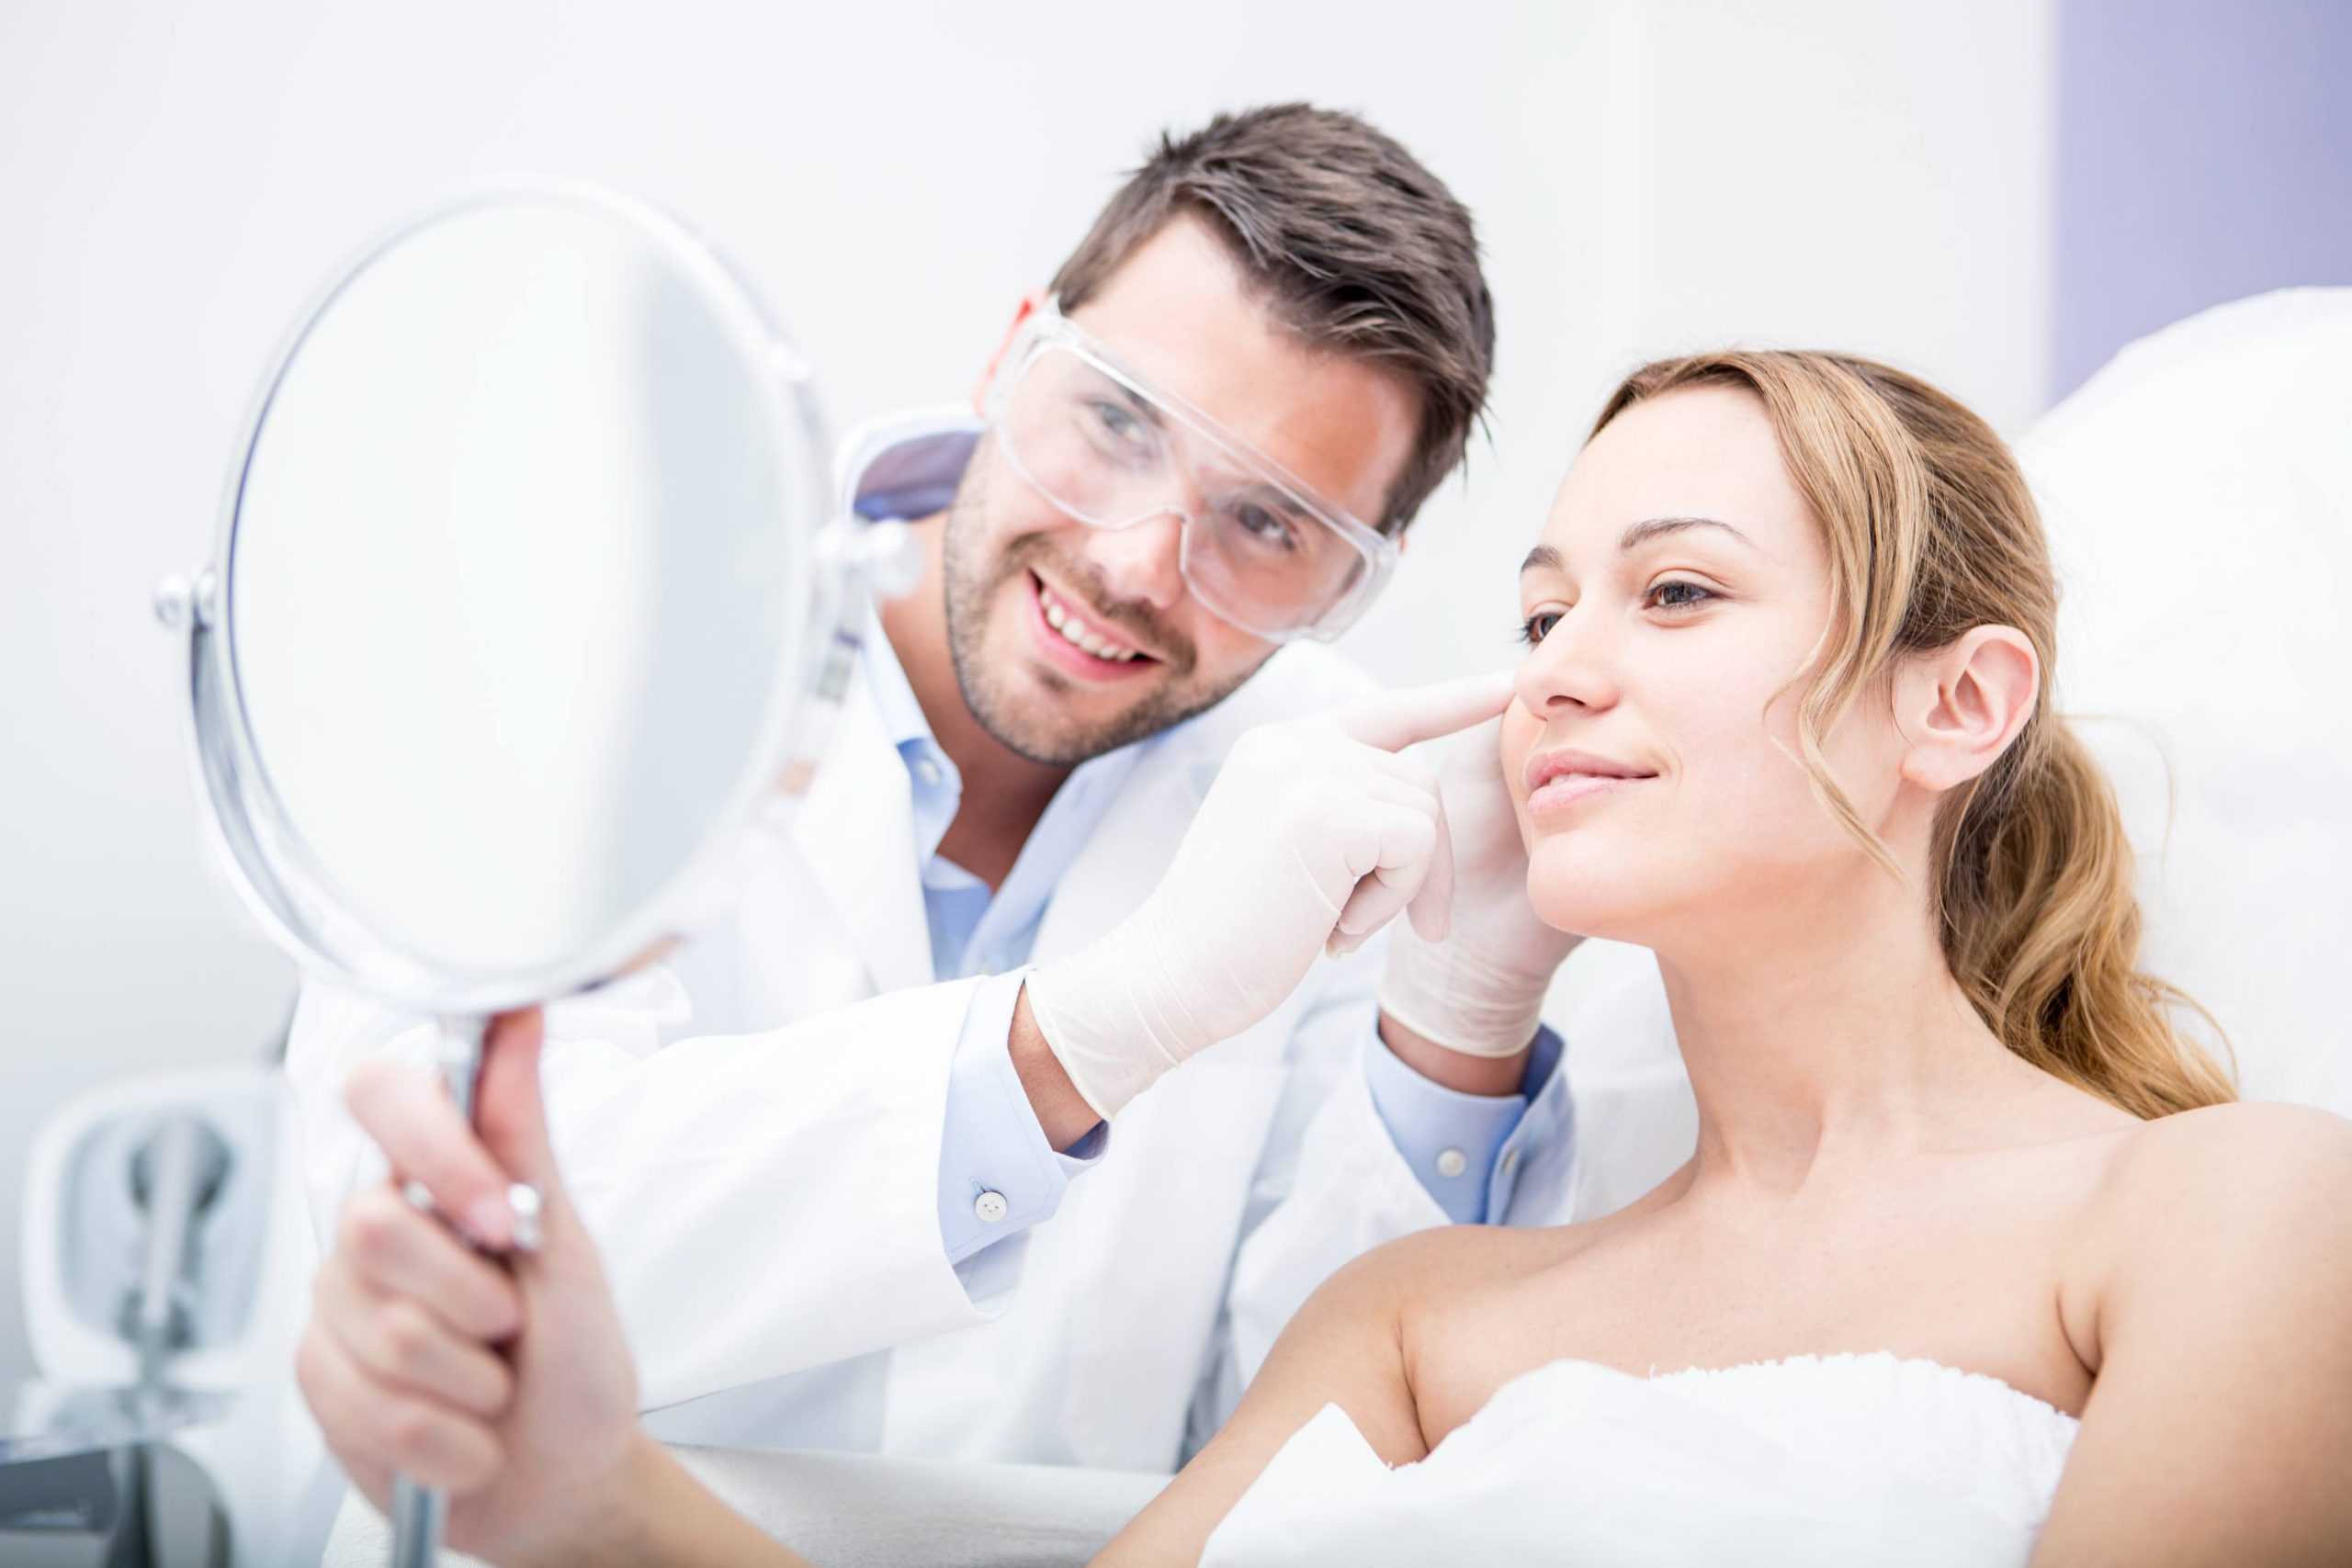 Tips for selecting the right plastic surgeon